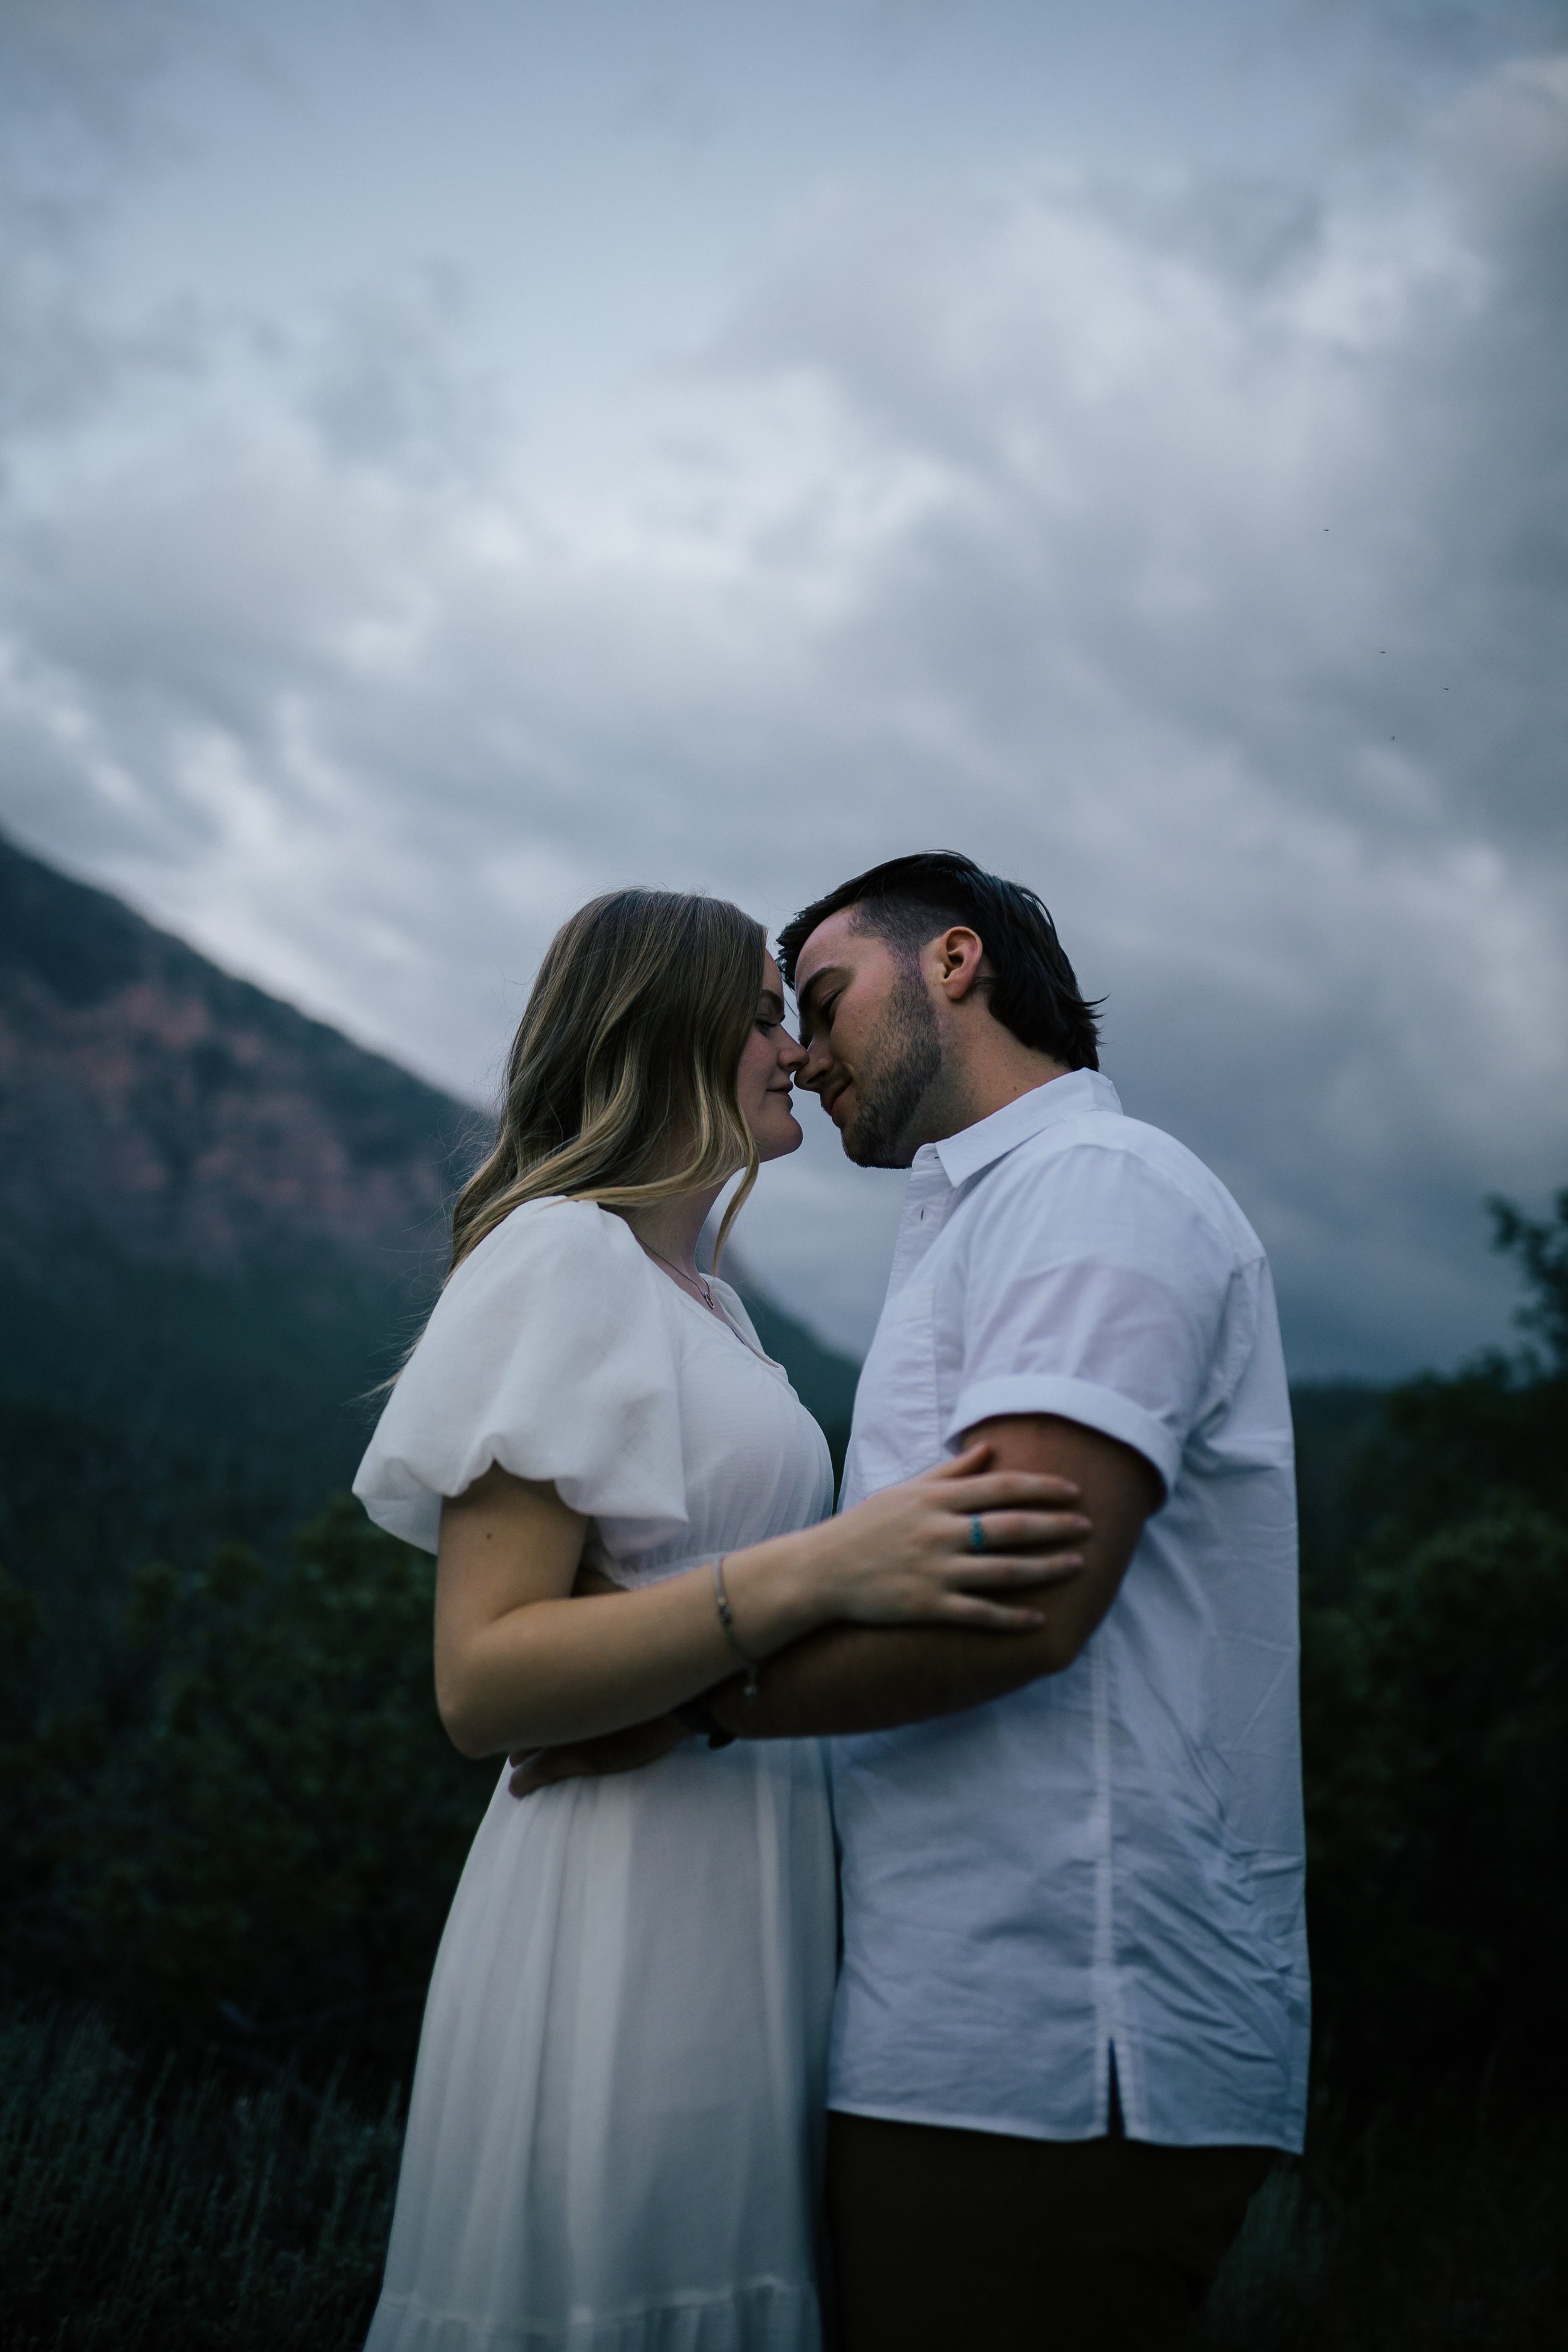  Summer anniversary couples session in the mountains. A young couple walks together as the sun goes down with a colorful pink and blue sky.. Utah photographer. Engagement session. #utahphotographer #utahengagements  